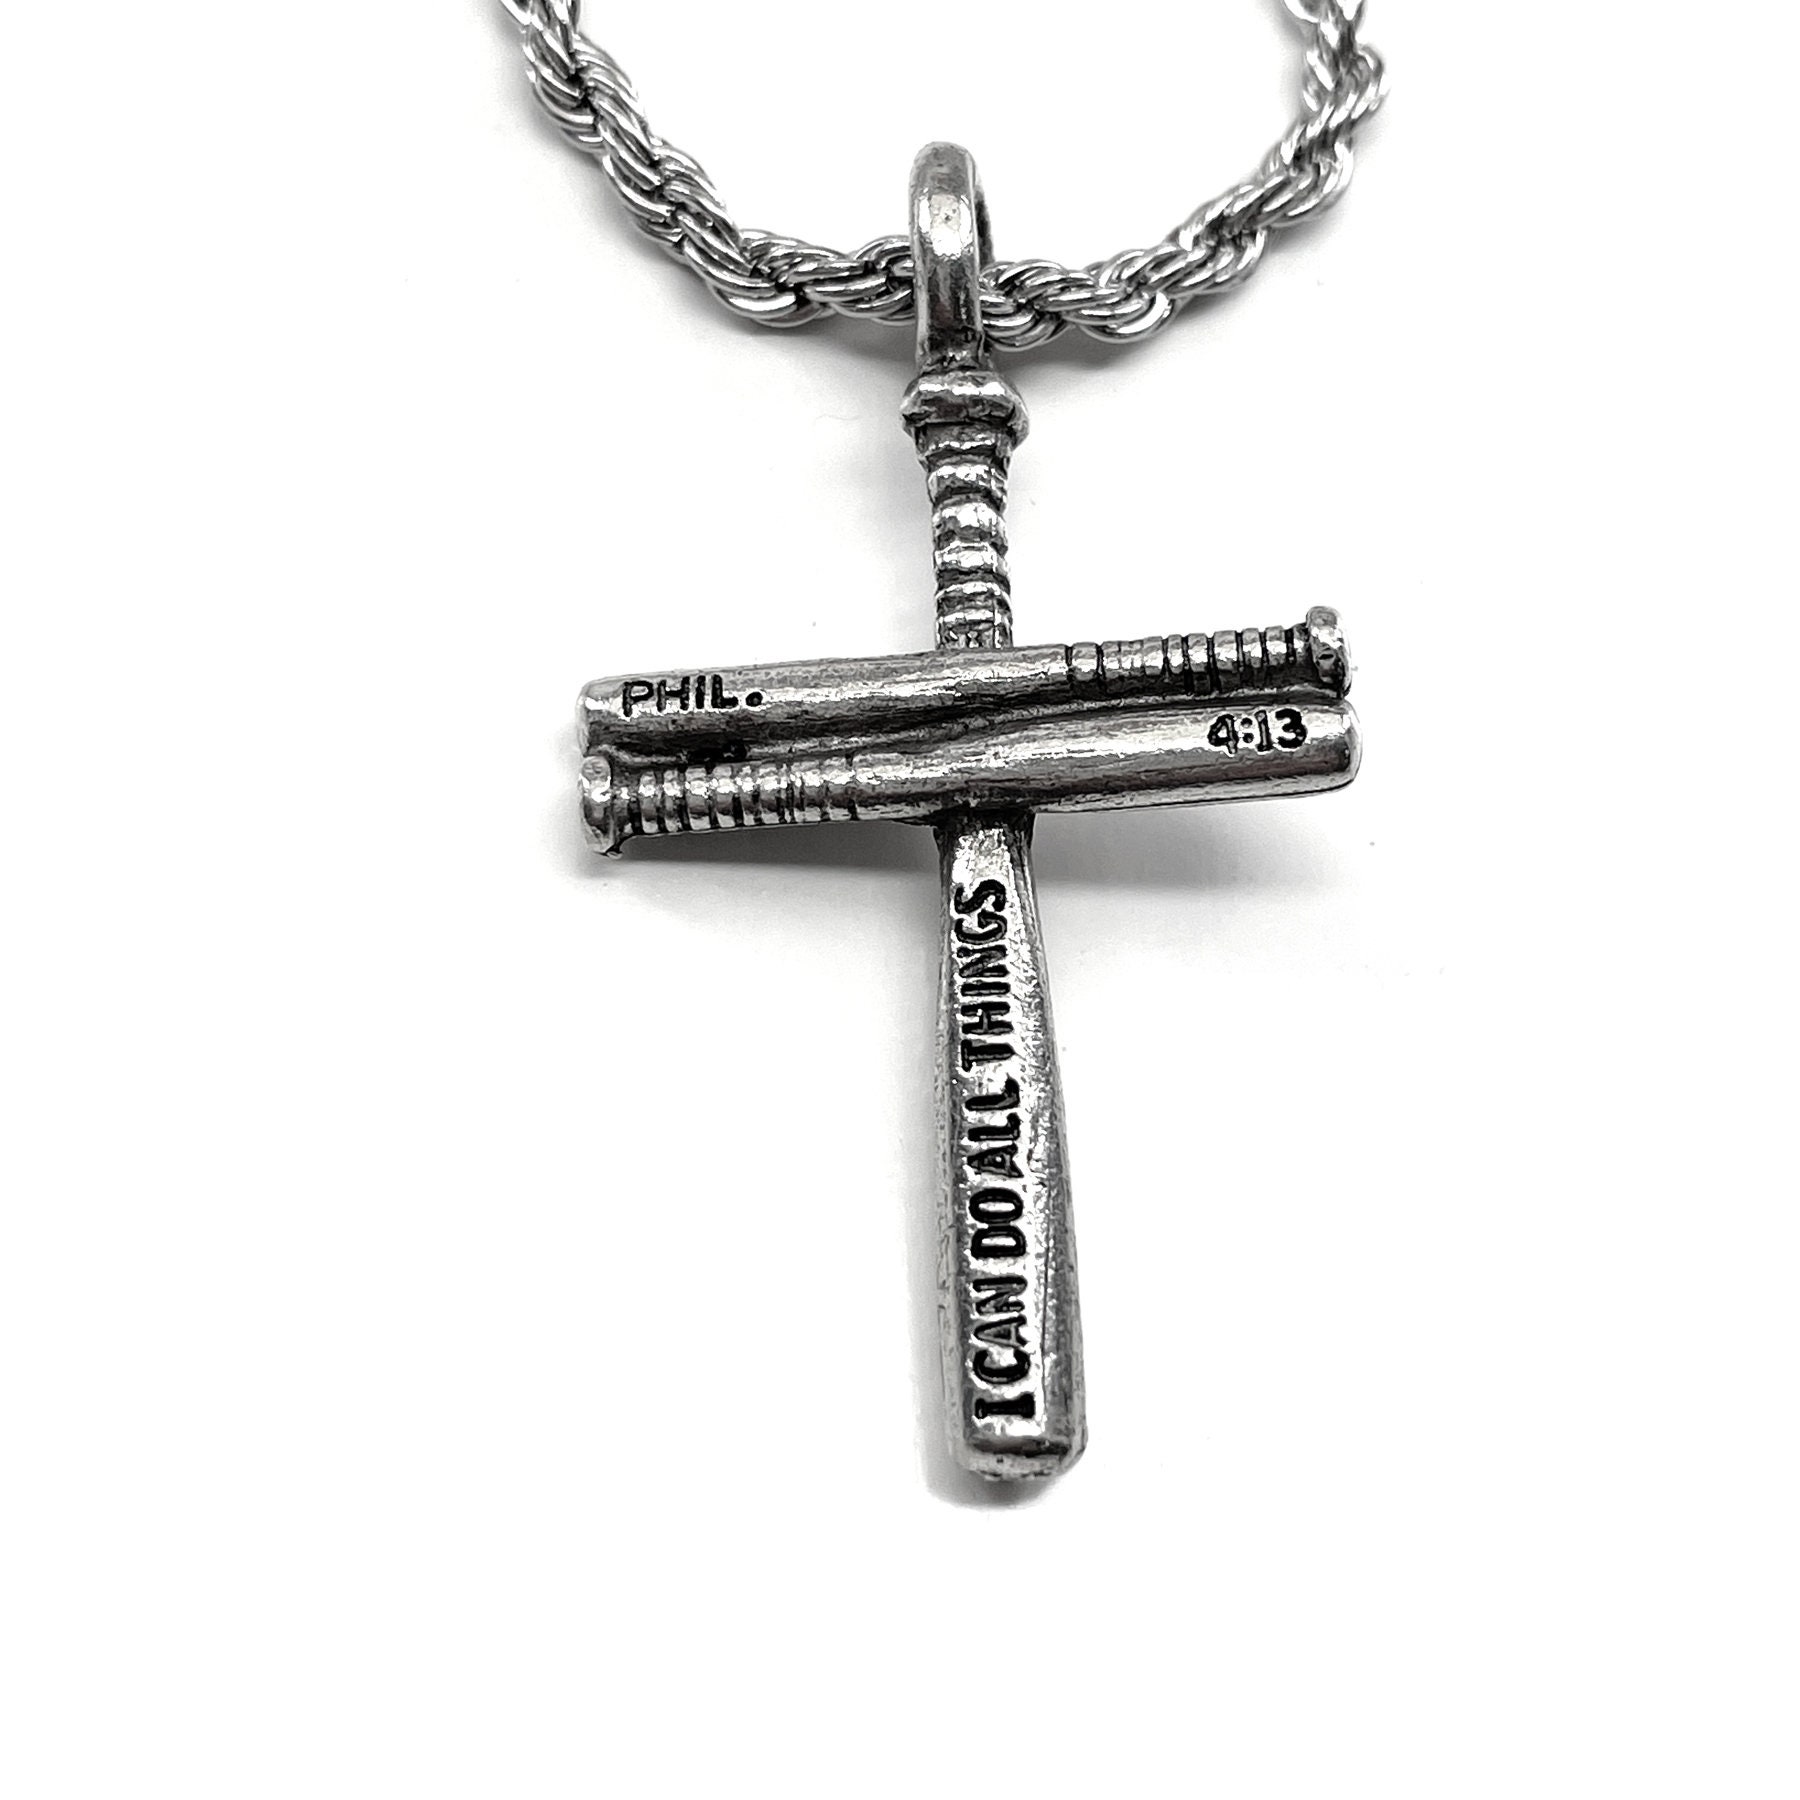 Pawnished Gold Strikeout K Baseball Bat Cross Necklace With Titanium Golf  Tee And Ball Pendant From Richeal8, $2.39 | DHgate.Com